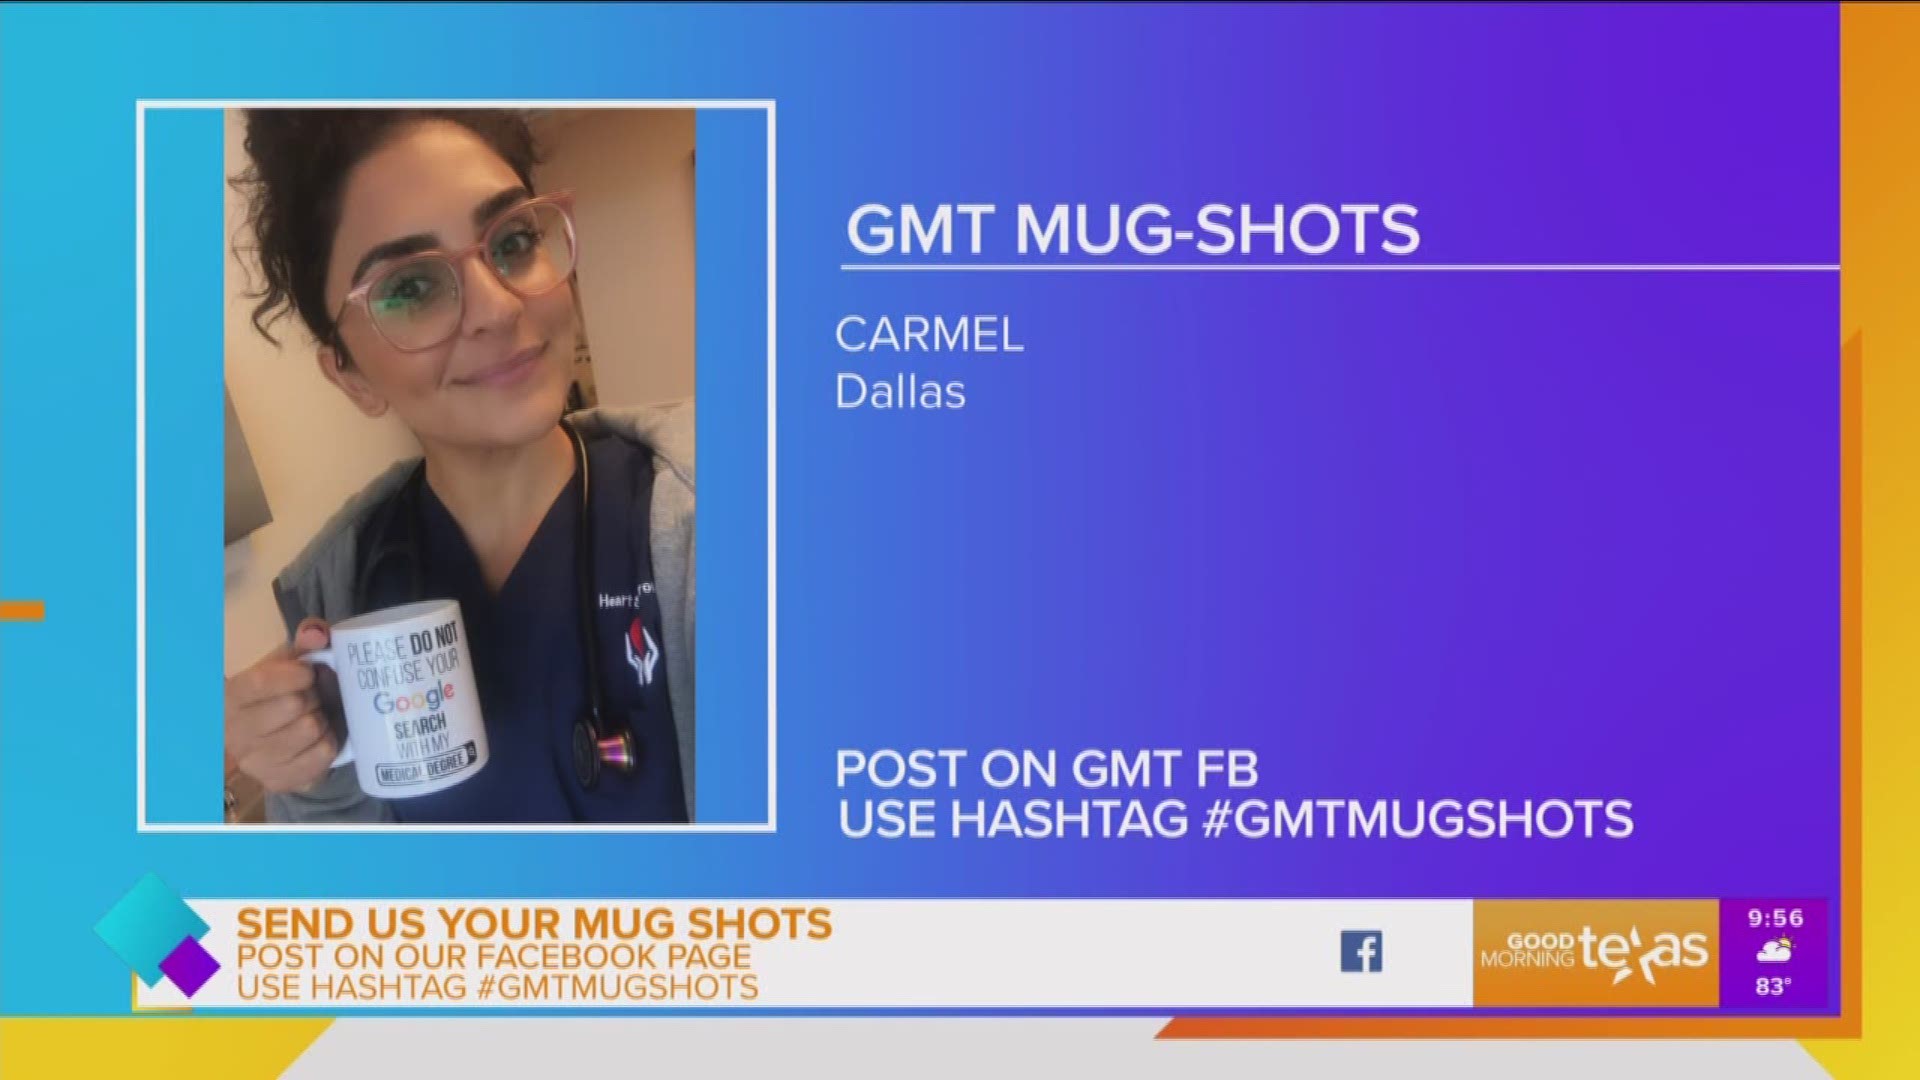 Send us your mug shots! Post them on our Facebook page and use the hashtag #GMTMugShots